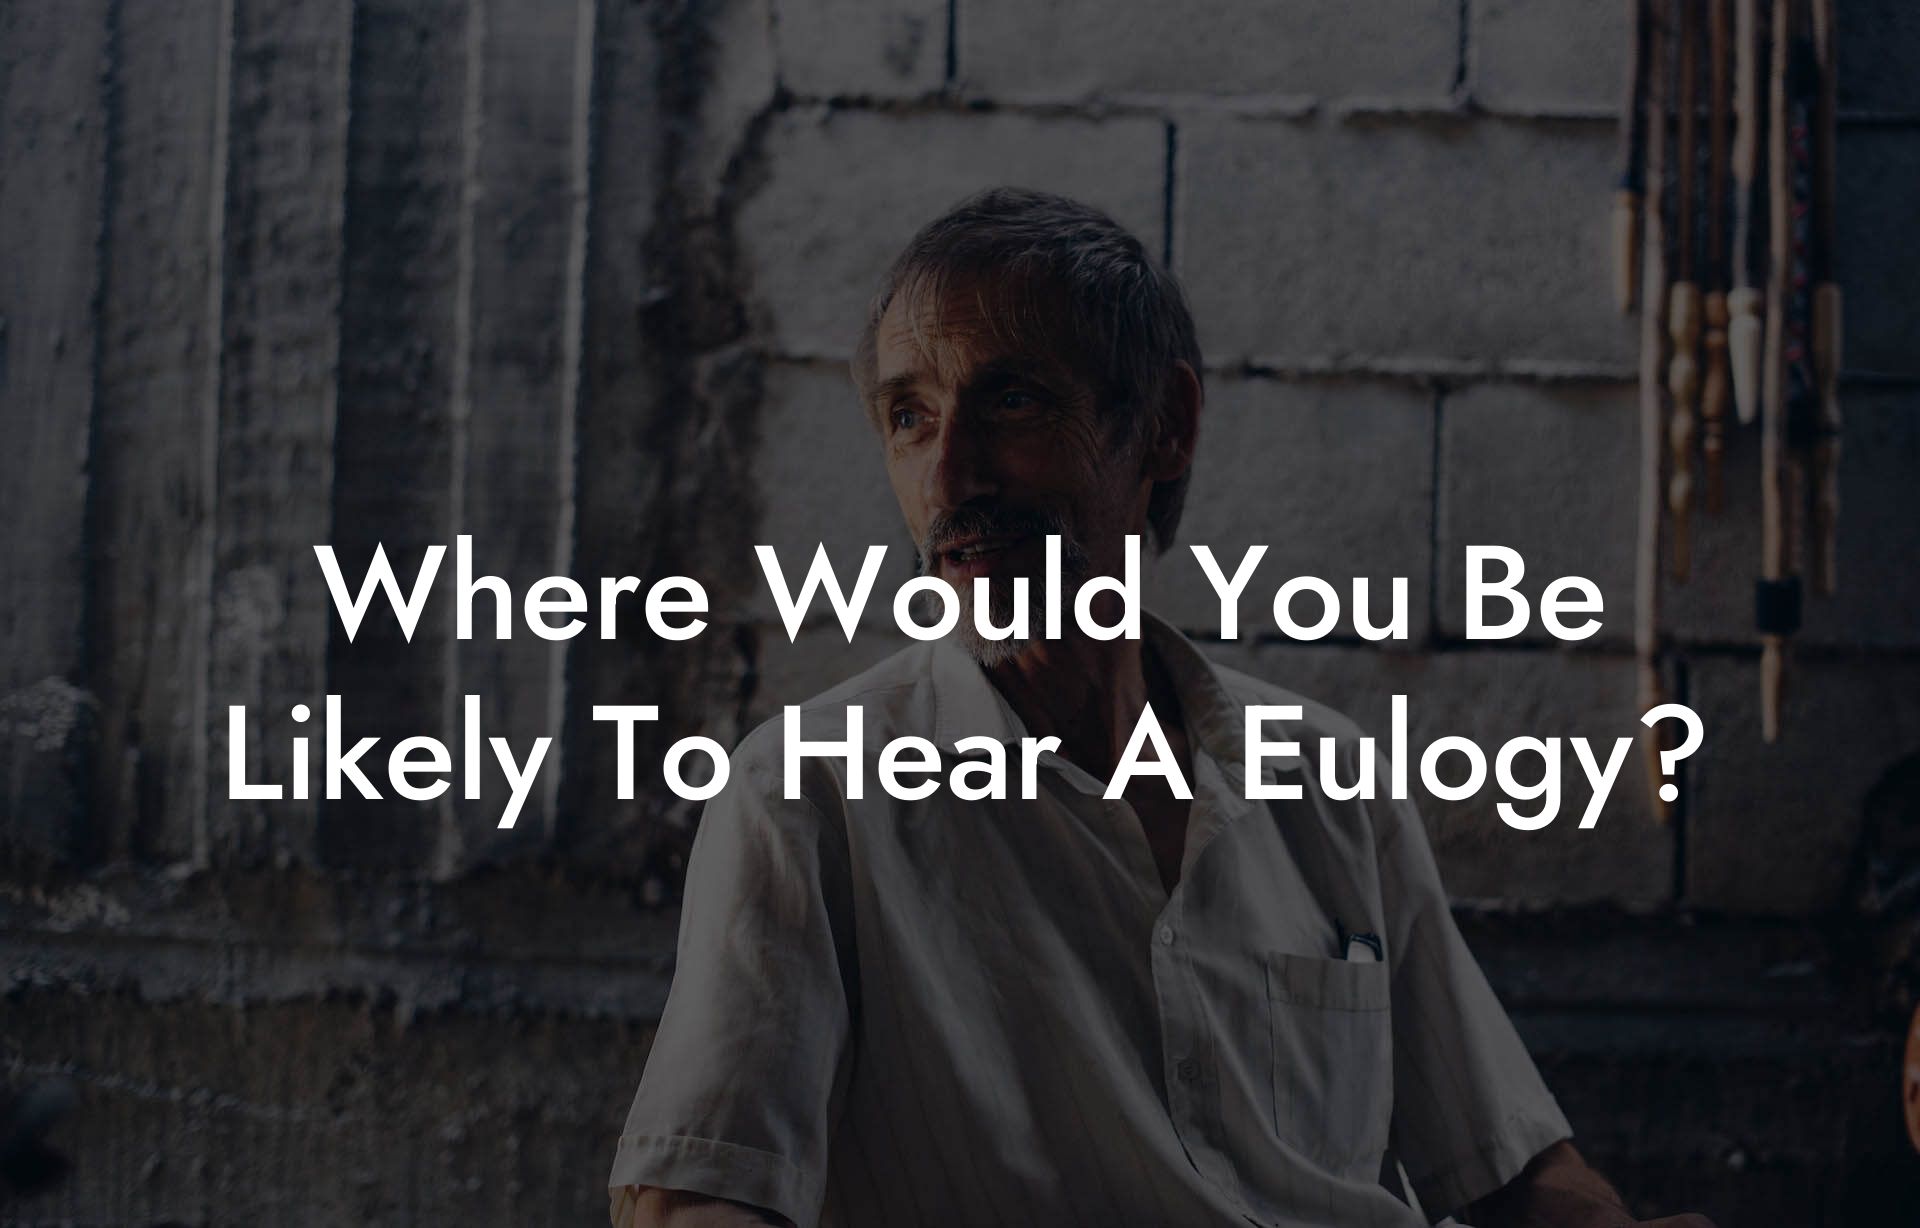 Where Would You Be Likely To Hear A Eulogy?